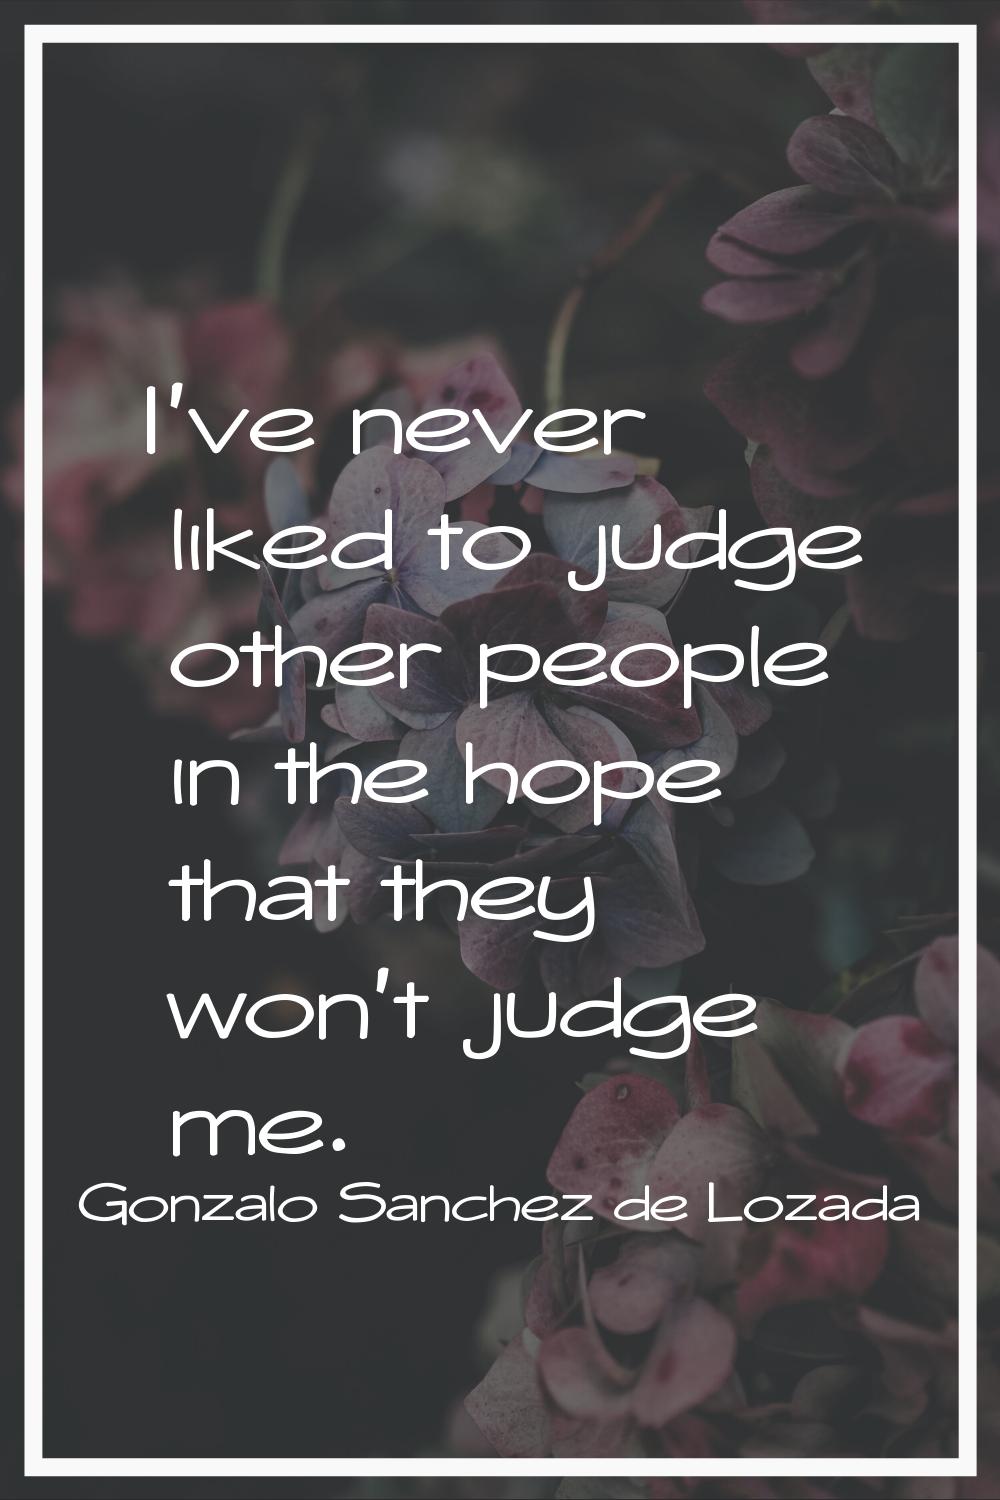 I've never liked to judge other people in the hope that they won't judge me.